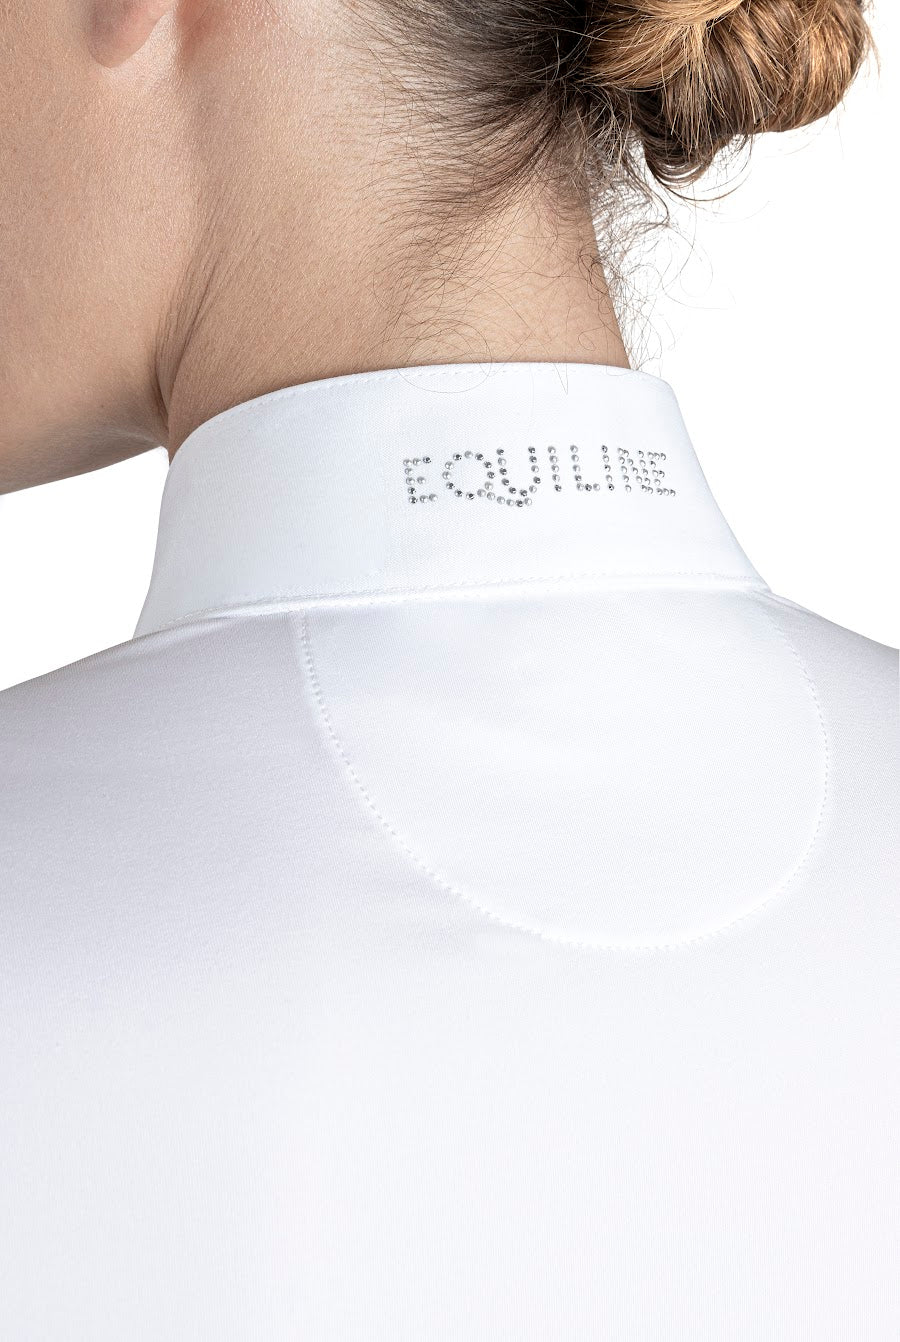 The Ladies Equiline Gollyg Stud Pleated L/S White Show Shirt